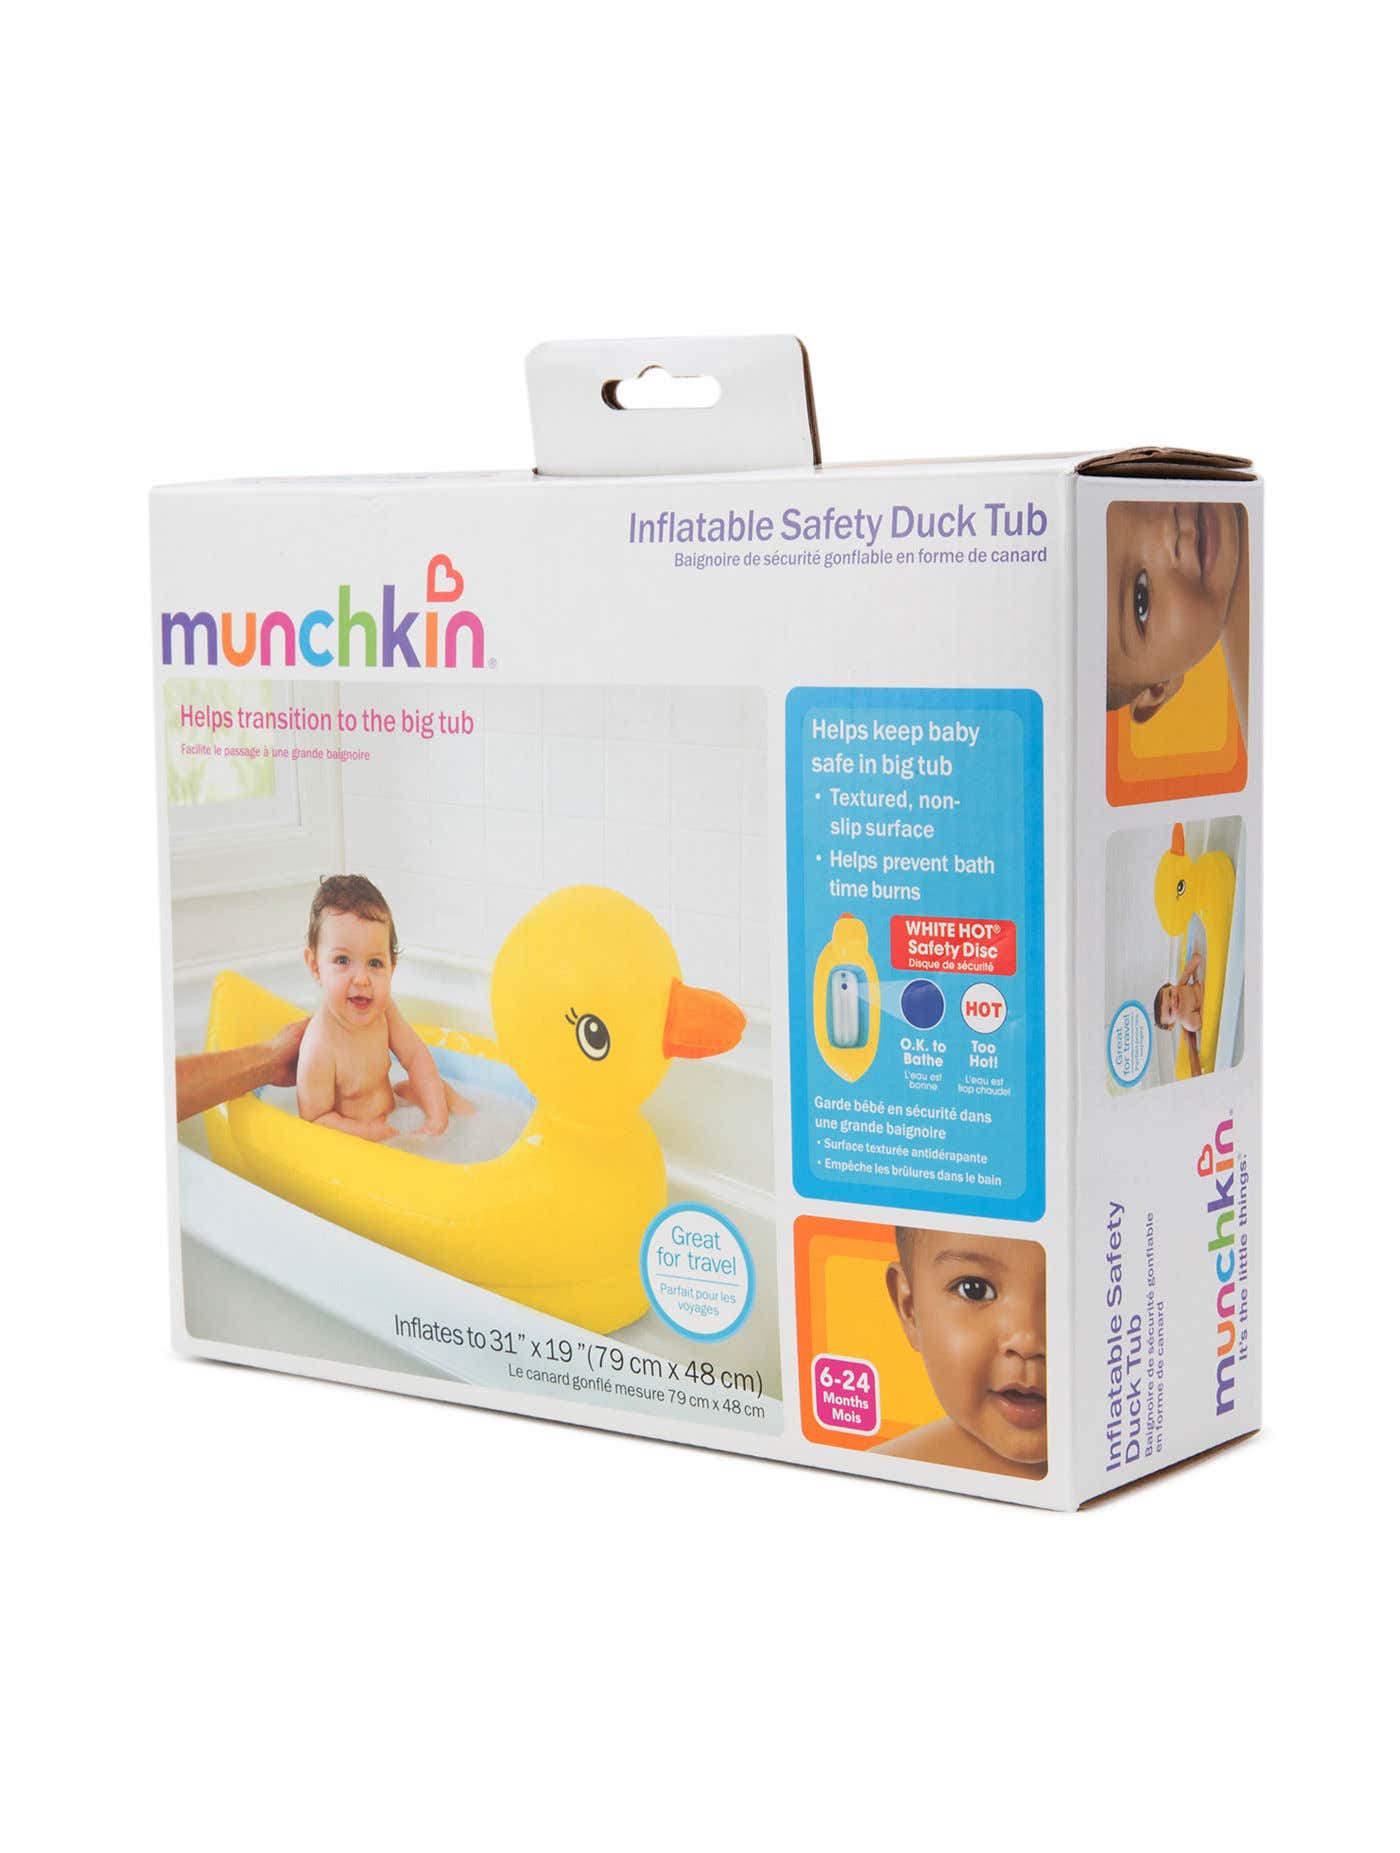 e-Tax, MUNCHKIN Hot Inflatable Safety Duck Tub 32206